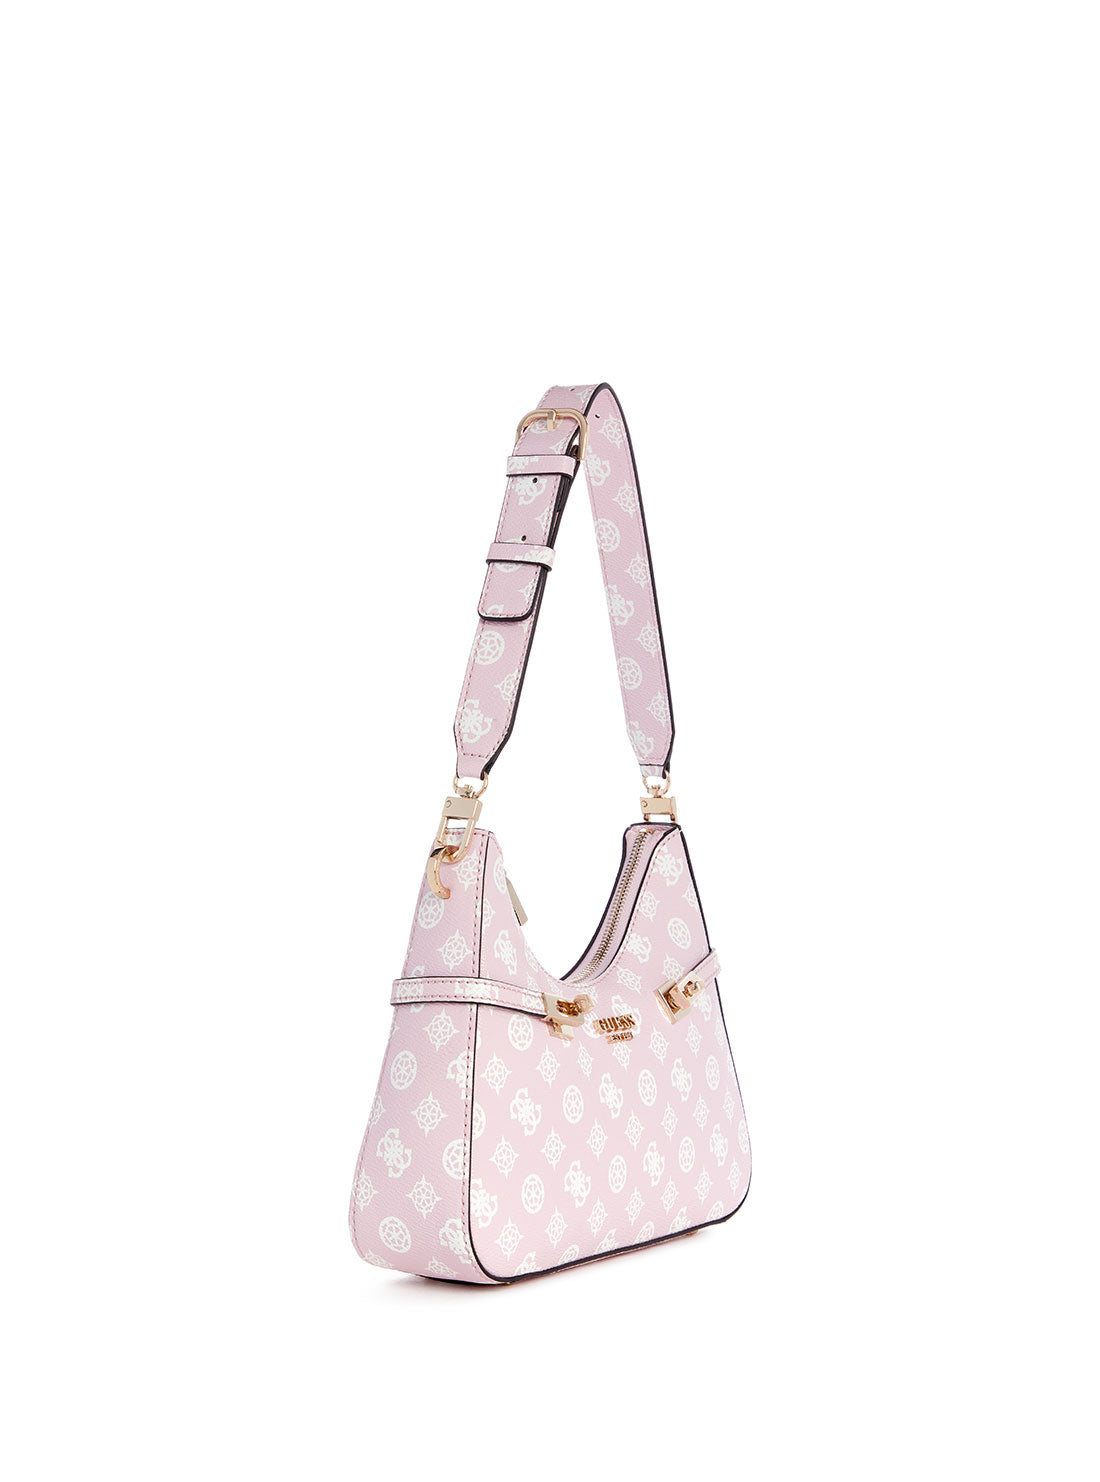 GUESS Pink Logo Loralee Hobo Bag side view